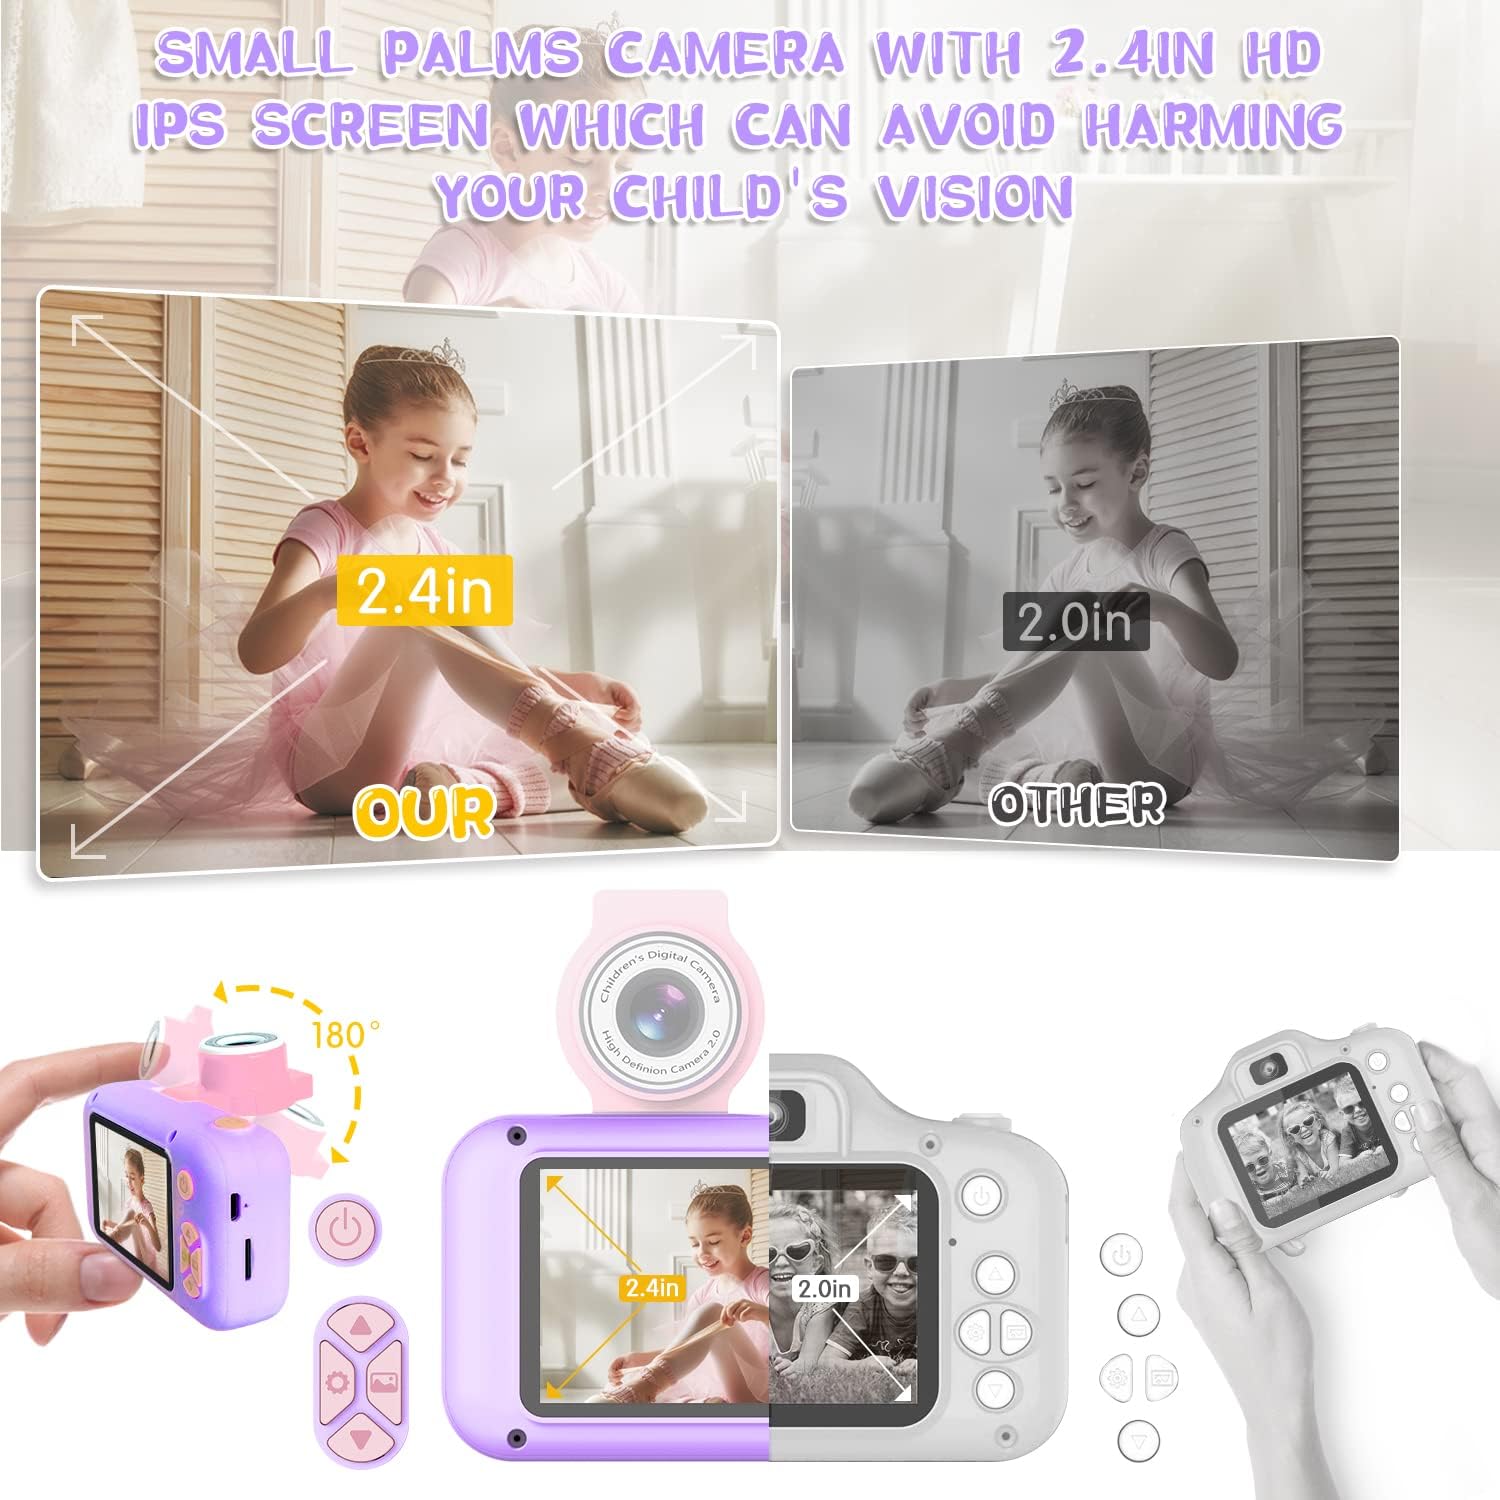 Kid Camera,ARNSSIEN Camera for Kid,2.4in IPS Screen Digital Camera,180°Flip Len Student Camera,Children Selfie Camera with Playback Game,Christmas/Birthday Gift for 4 5 6 7 8 9 10 11 Cycle Old Girl Boy